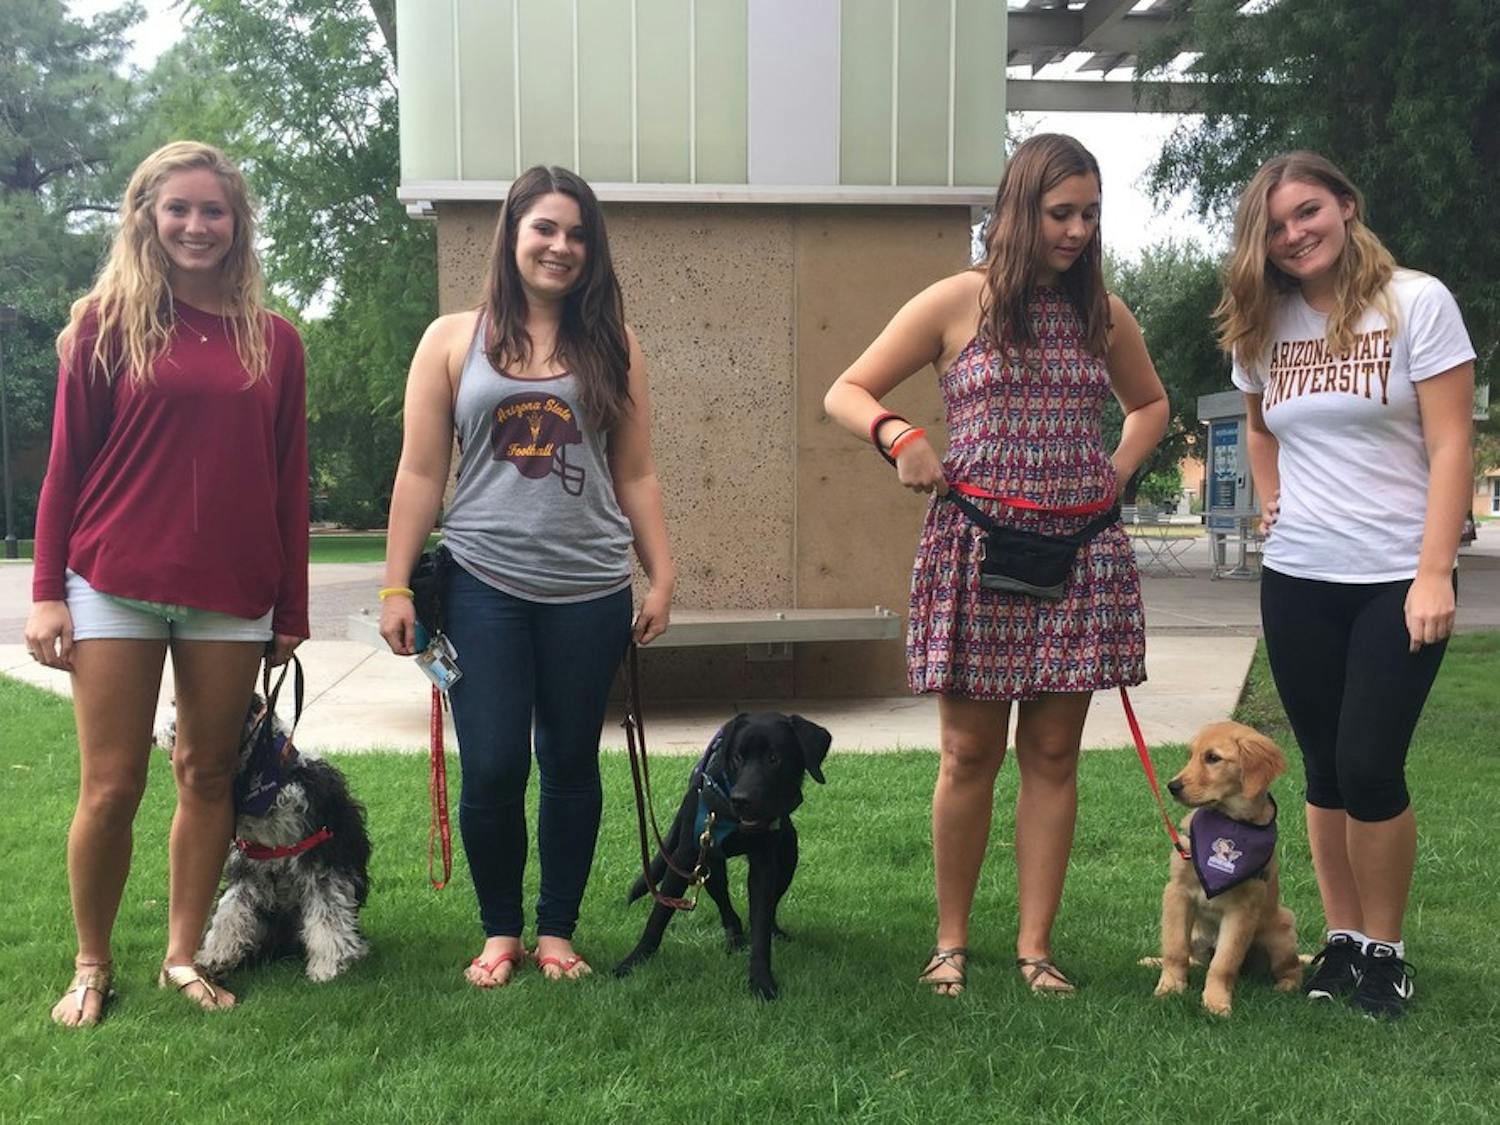 Biology sophomore Sydney McClure, kinesiology junior Taylor Randle, chemical engineering junior Rhiannon Olshansky and psychology sophomore Samantha Rodrigues pose with their service dogs Castle, Kristoff and McKenzie at the Memorial Union in Tempe on Saturday, Oct. 17, 2015.